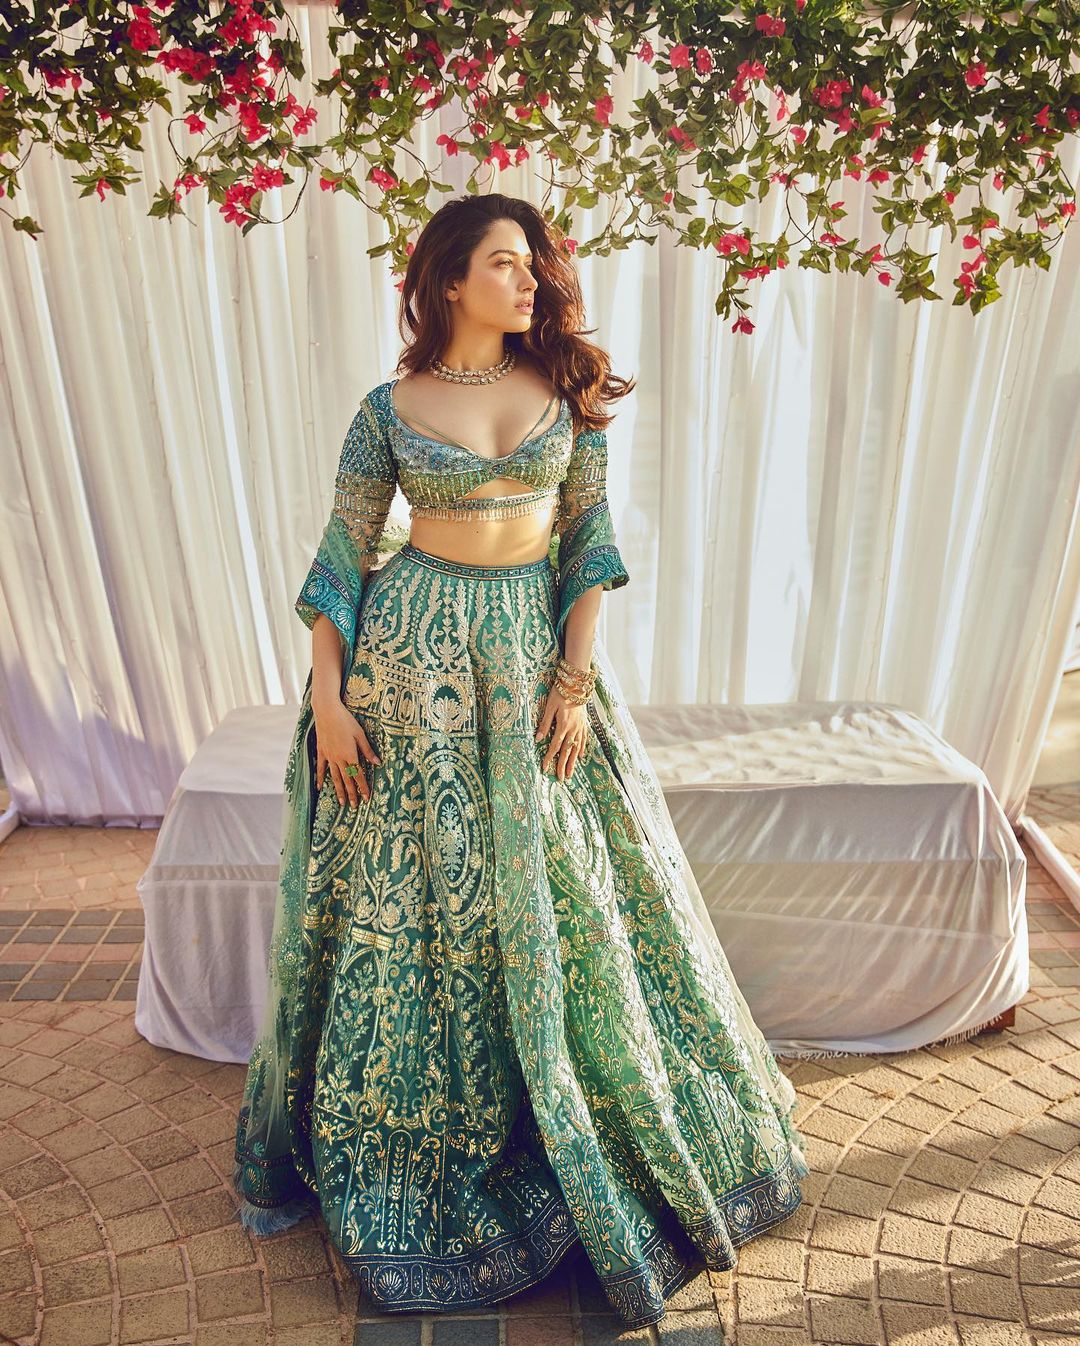 Tamannaah Bhatia Is A Sight For Sore Eyes In Beautiful Ombre ...